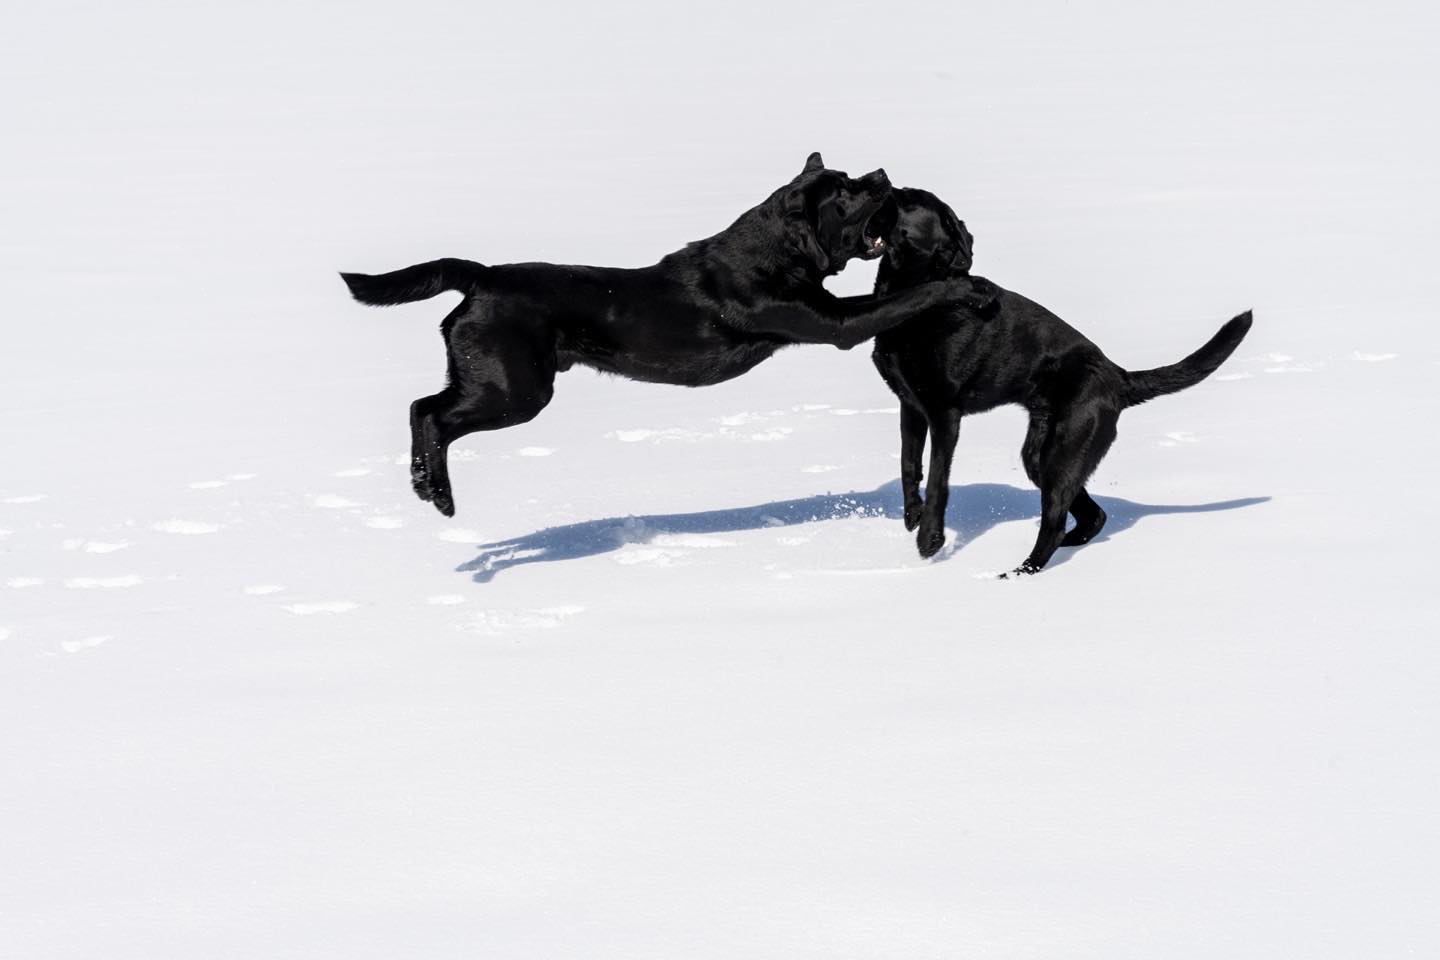 Hannah and Will Mook’s black labs, Clyde and Rangeley, frolicking in the great snow fields across the road from our home in Driggs, Idaho. Cindy and I were hosting them last weekend while the Mooks were away, and I couldn’t resist the black dogs on clean white snow photo op! #hannahandwillmook #blacklabs #driggsidaho #tetonvalleyidaho #bestofthegemstate #orcuttphotography